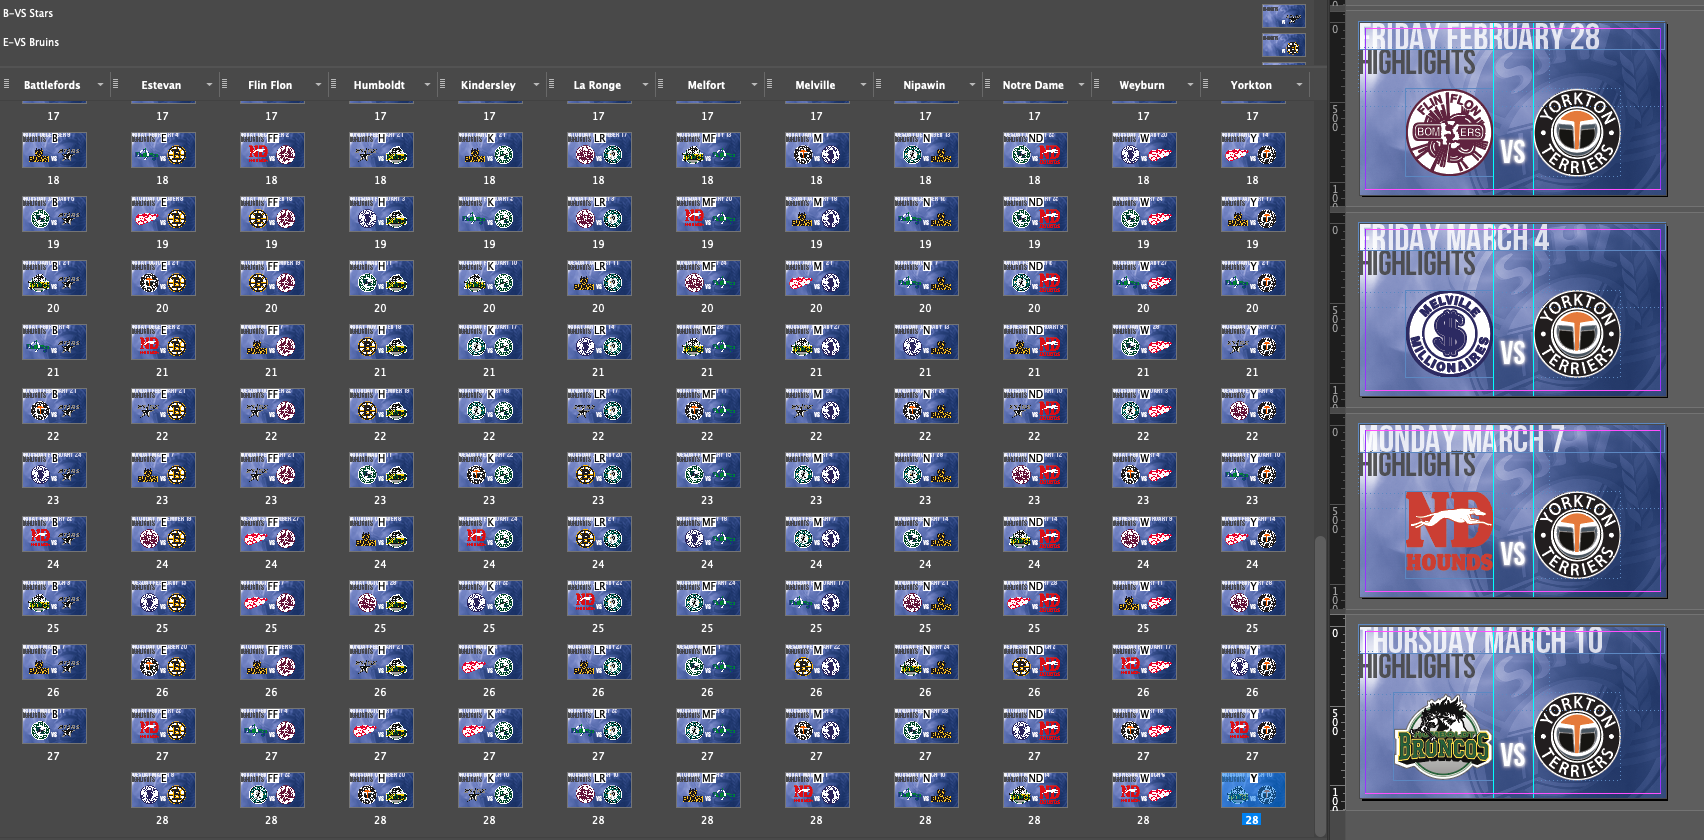 What an entire season of highlight thumbnails looks like in the program used to design and create them.